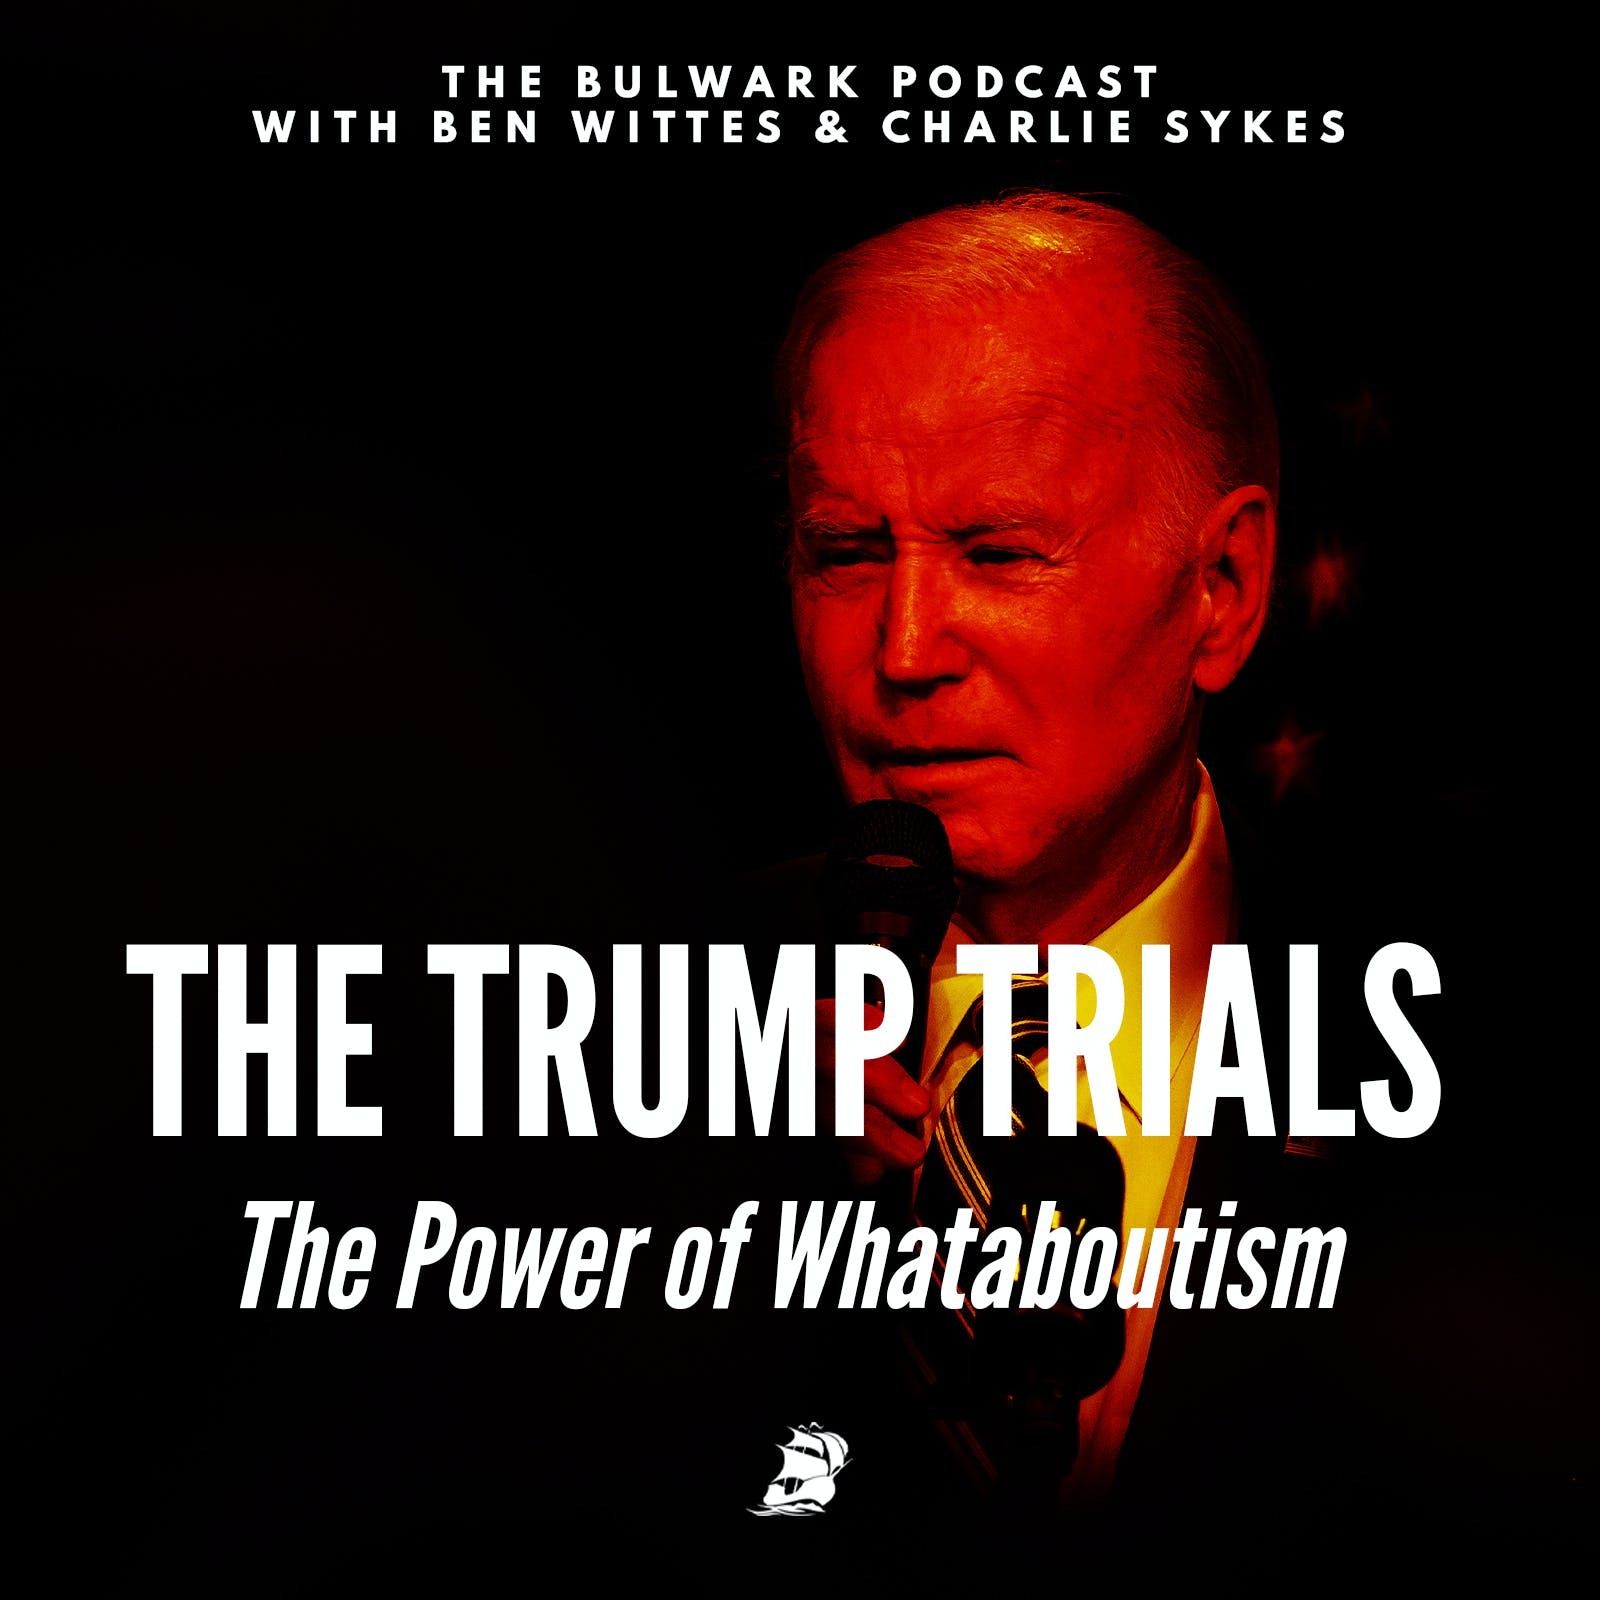 The Power of Whataboutism by The Bulwark Podcast